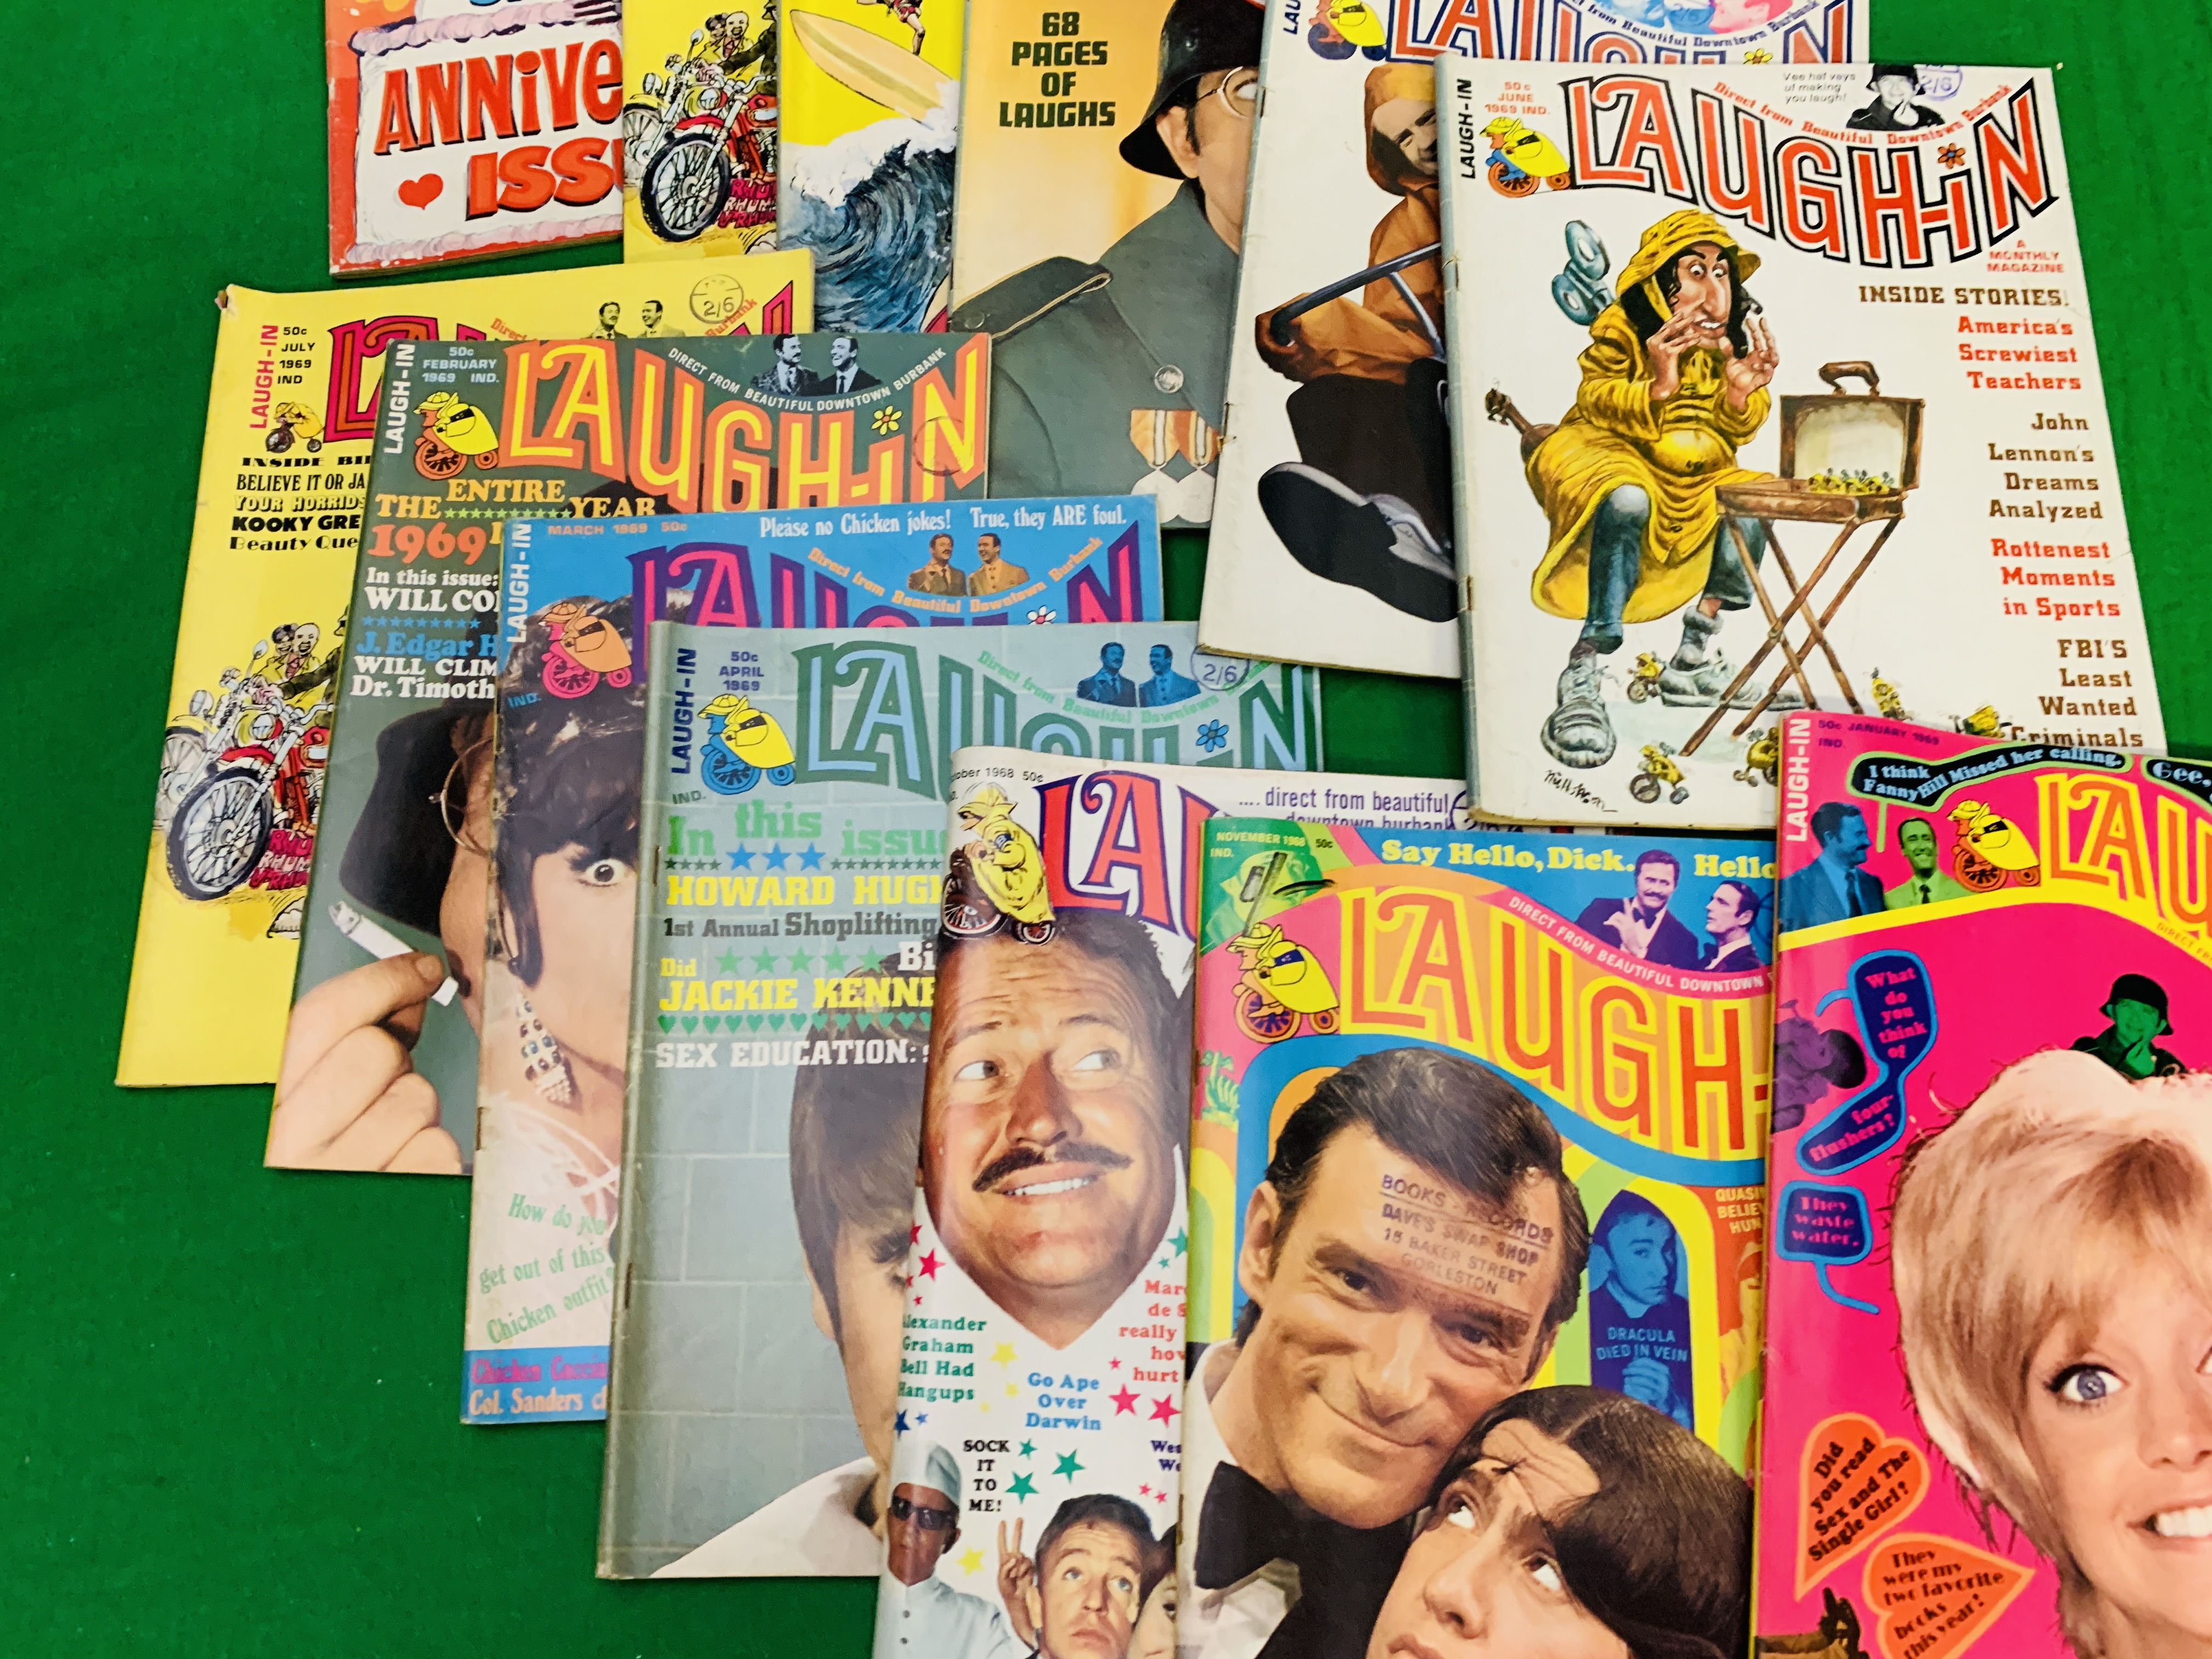 A QUANTITY OF LAUGH-IN MAGAZINES FROM 1968 AND 1969 - Image 2 of 3